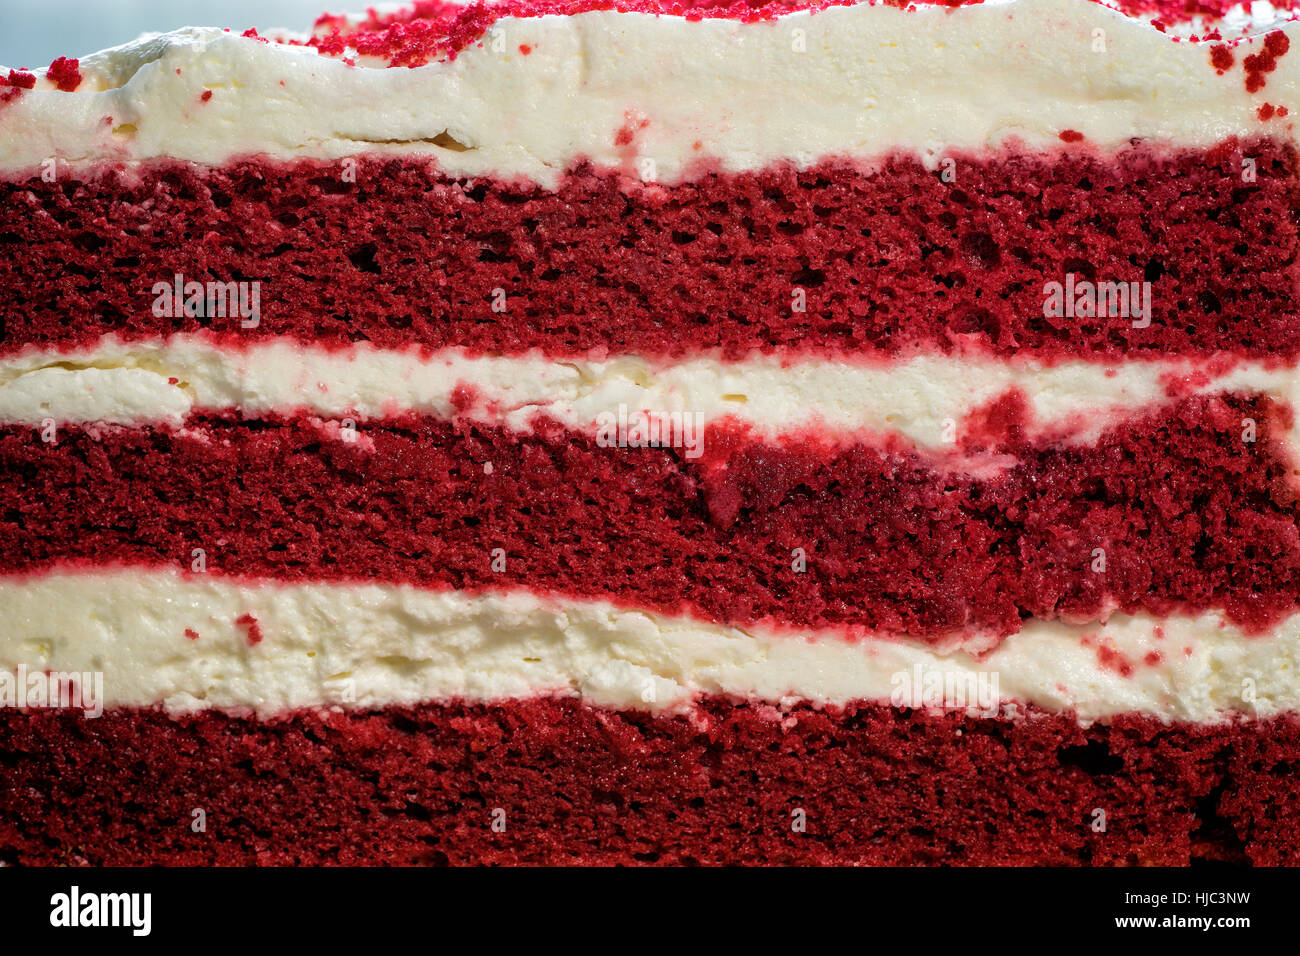 face cut of red velvel cake on macro image - can use to display or montage on product Stock Photo